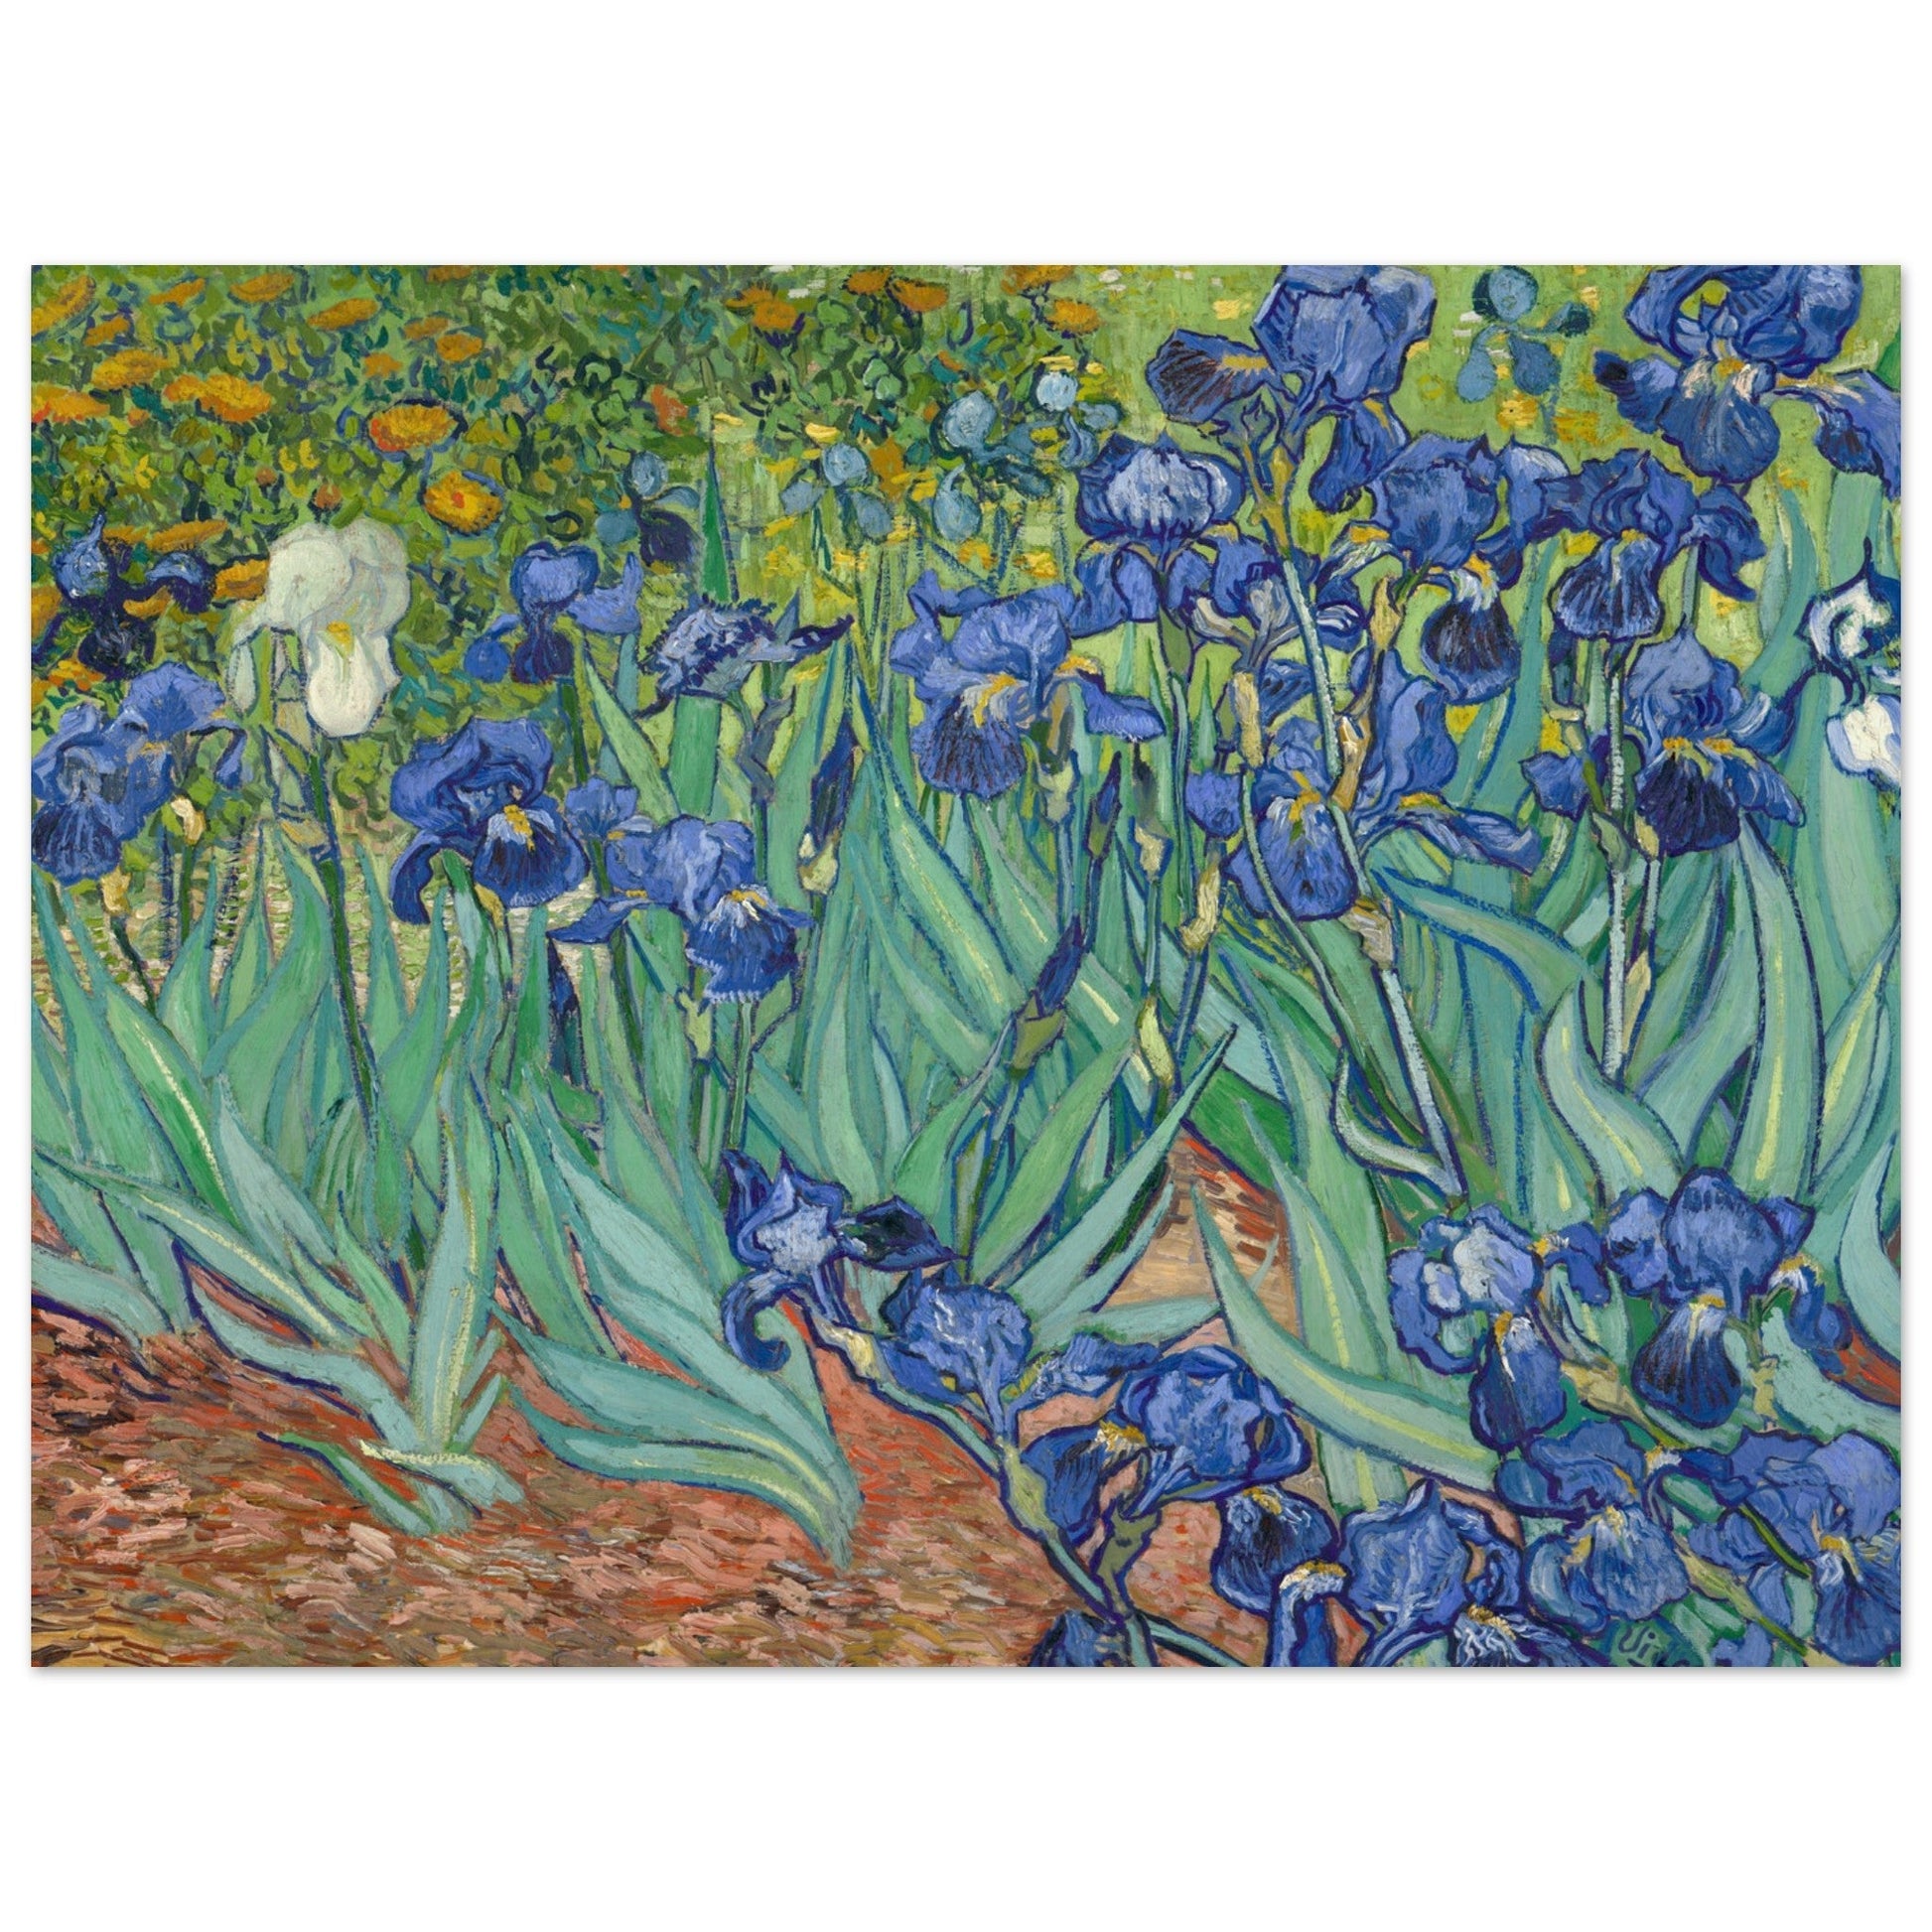 Colored Irises in the garden by Traditional Art.